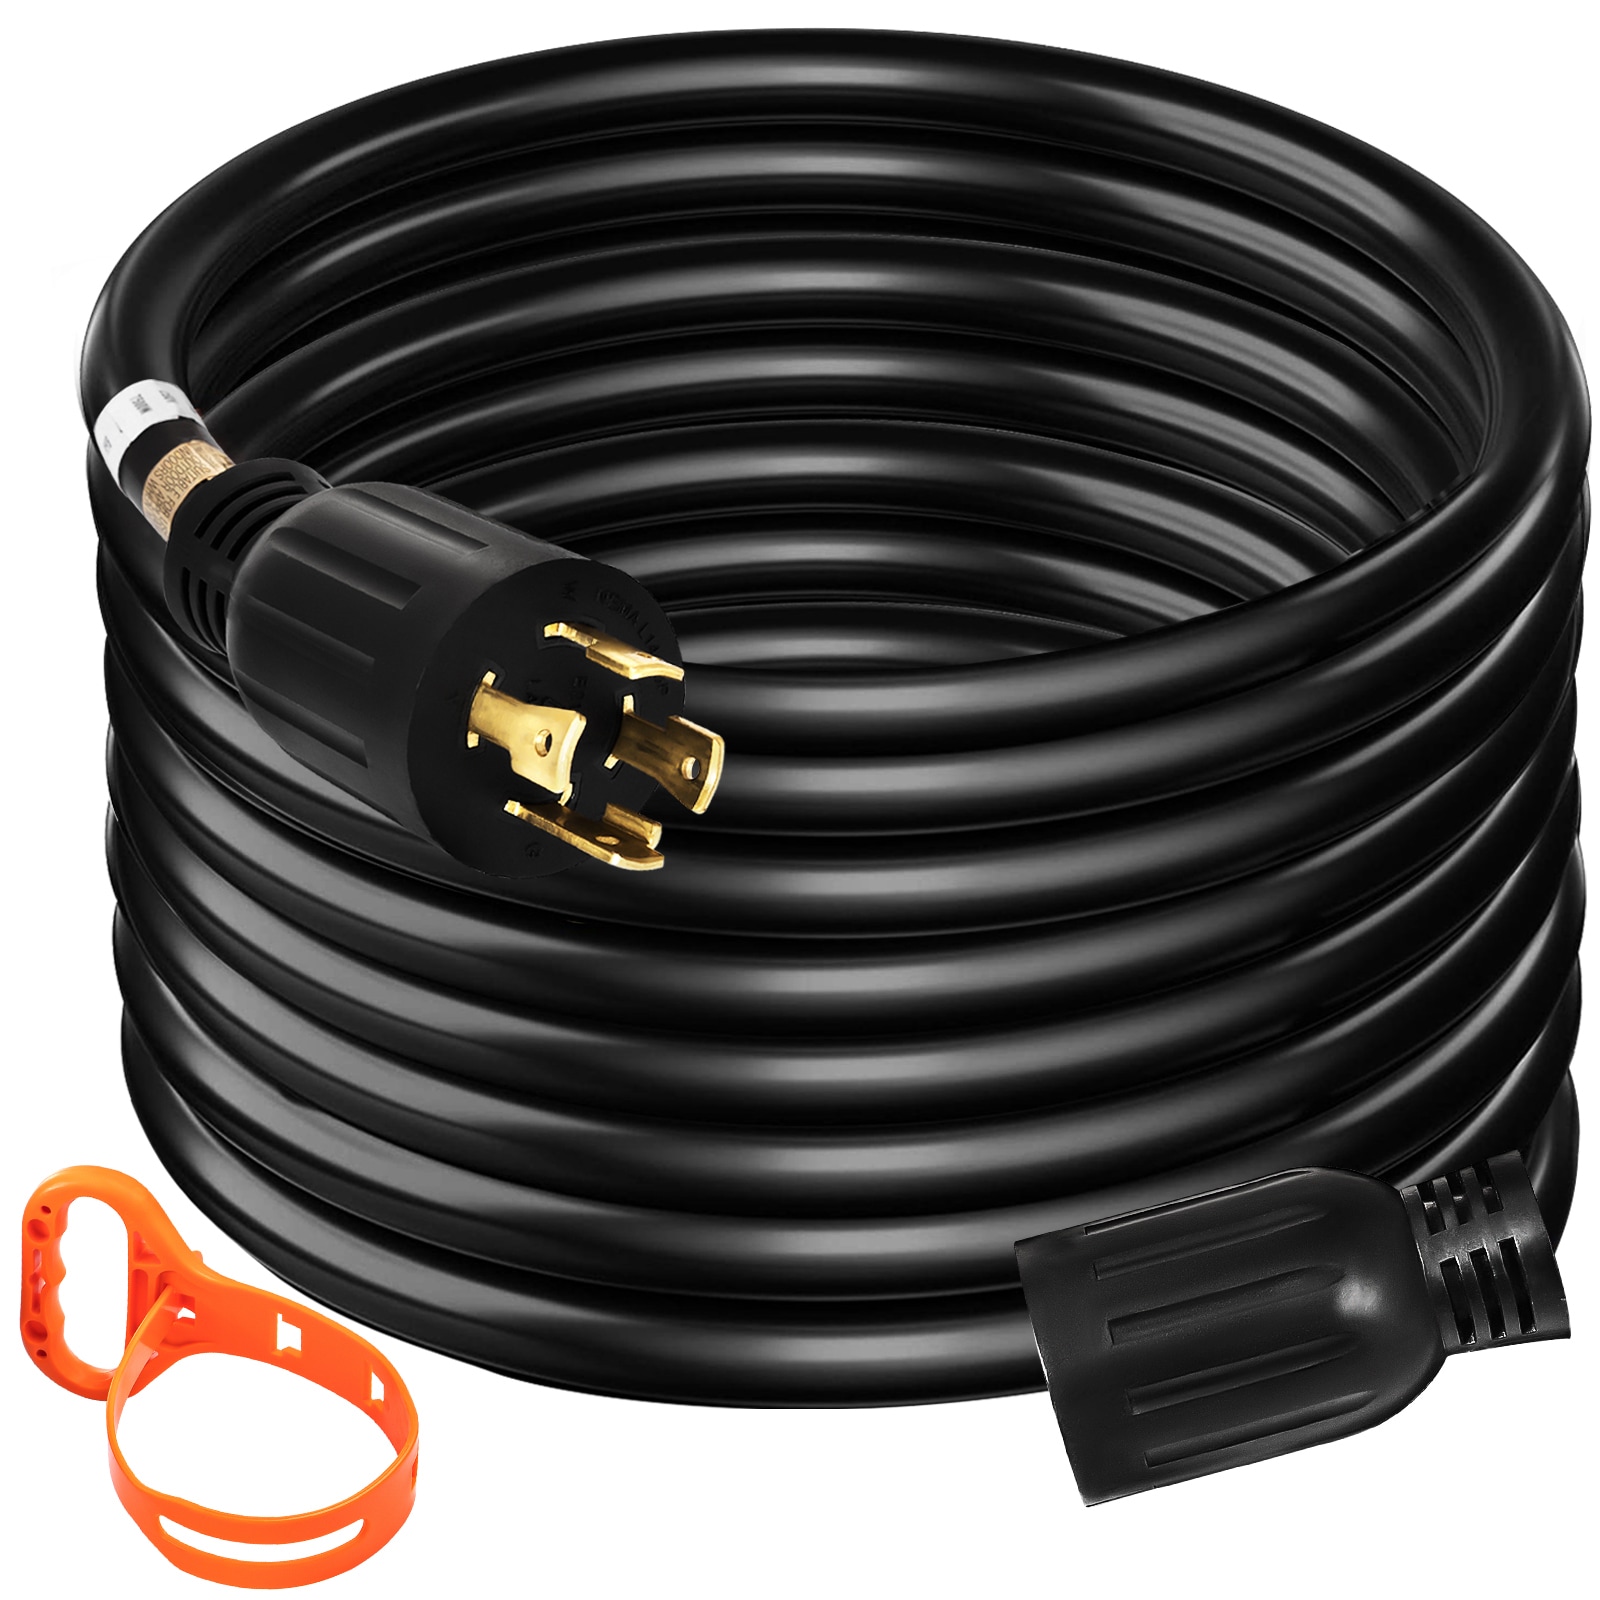 VEVOR 30 Amp Generator Cord 4 Wire 10-Gauge 40-ft / 4 3-Prong Outdoor SJTW Heavy Duty General Extension Cord in Black | FDJYCX40FT30A0001V1